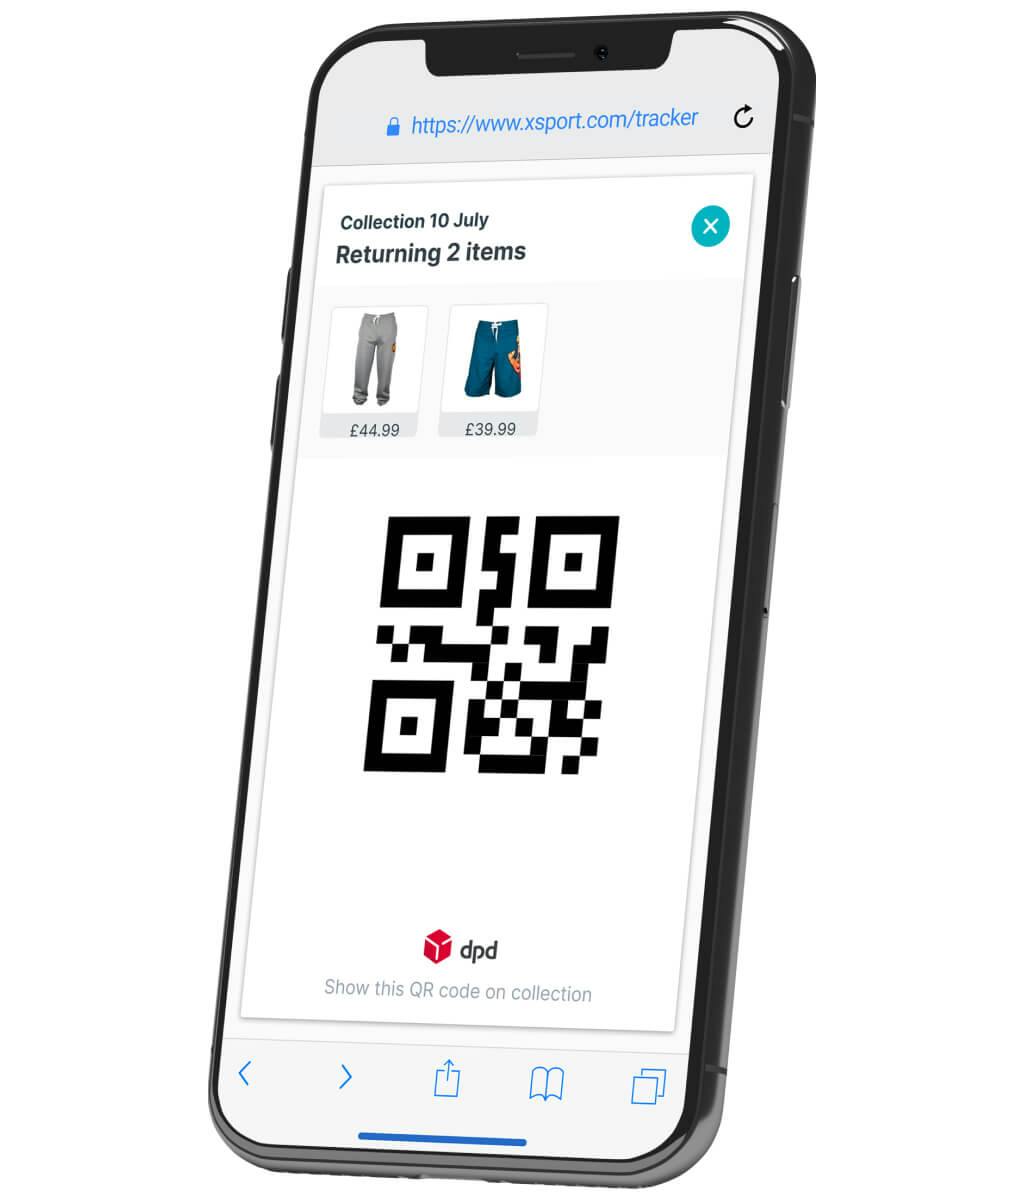 Customer account with qr-code for tracking parcel